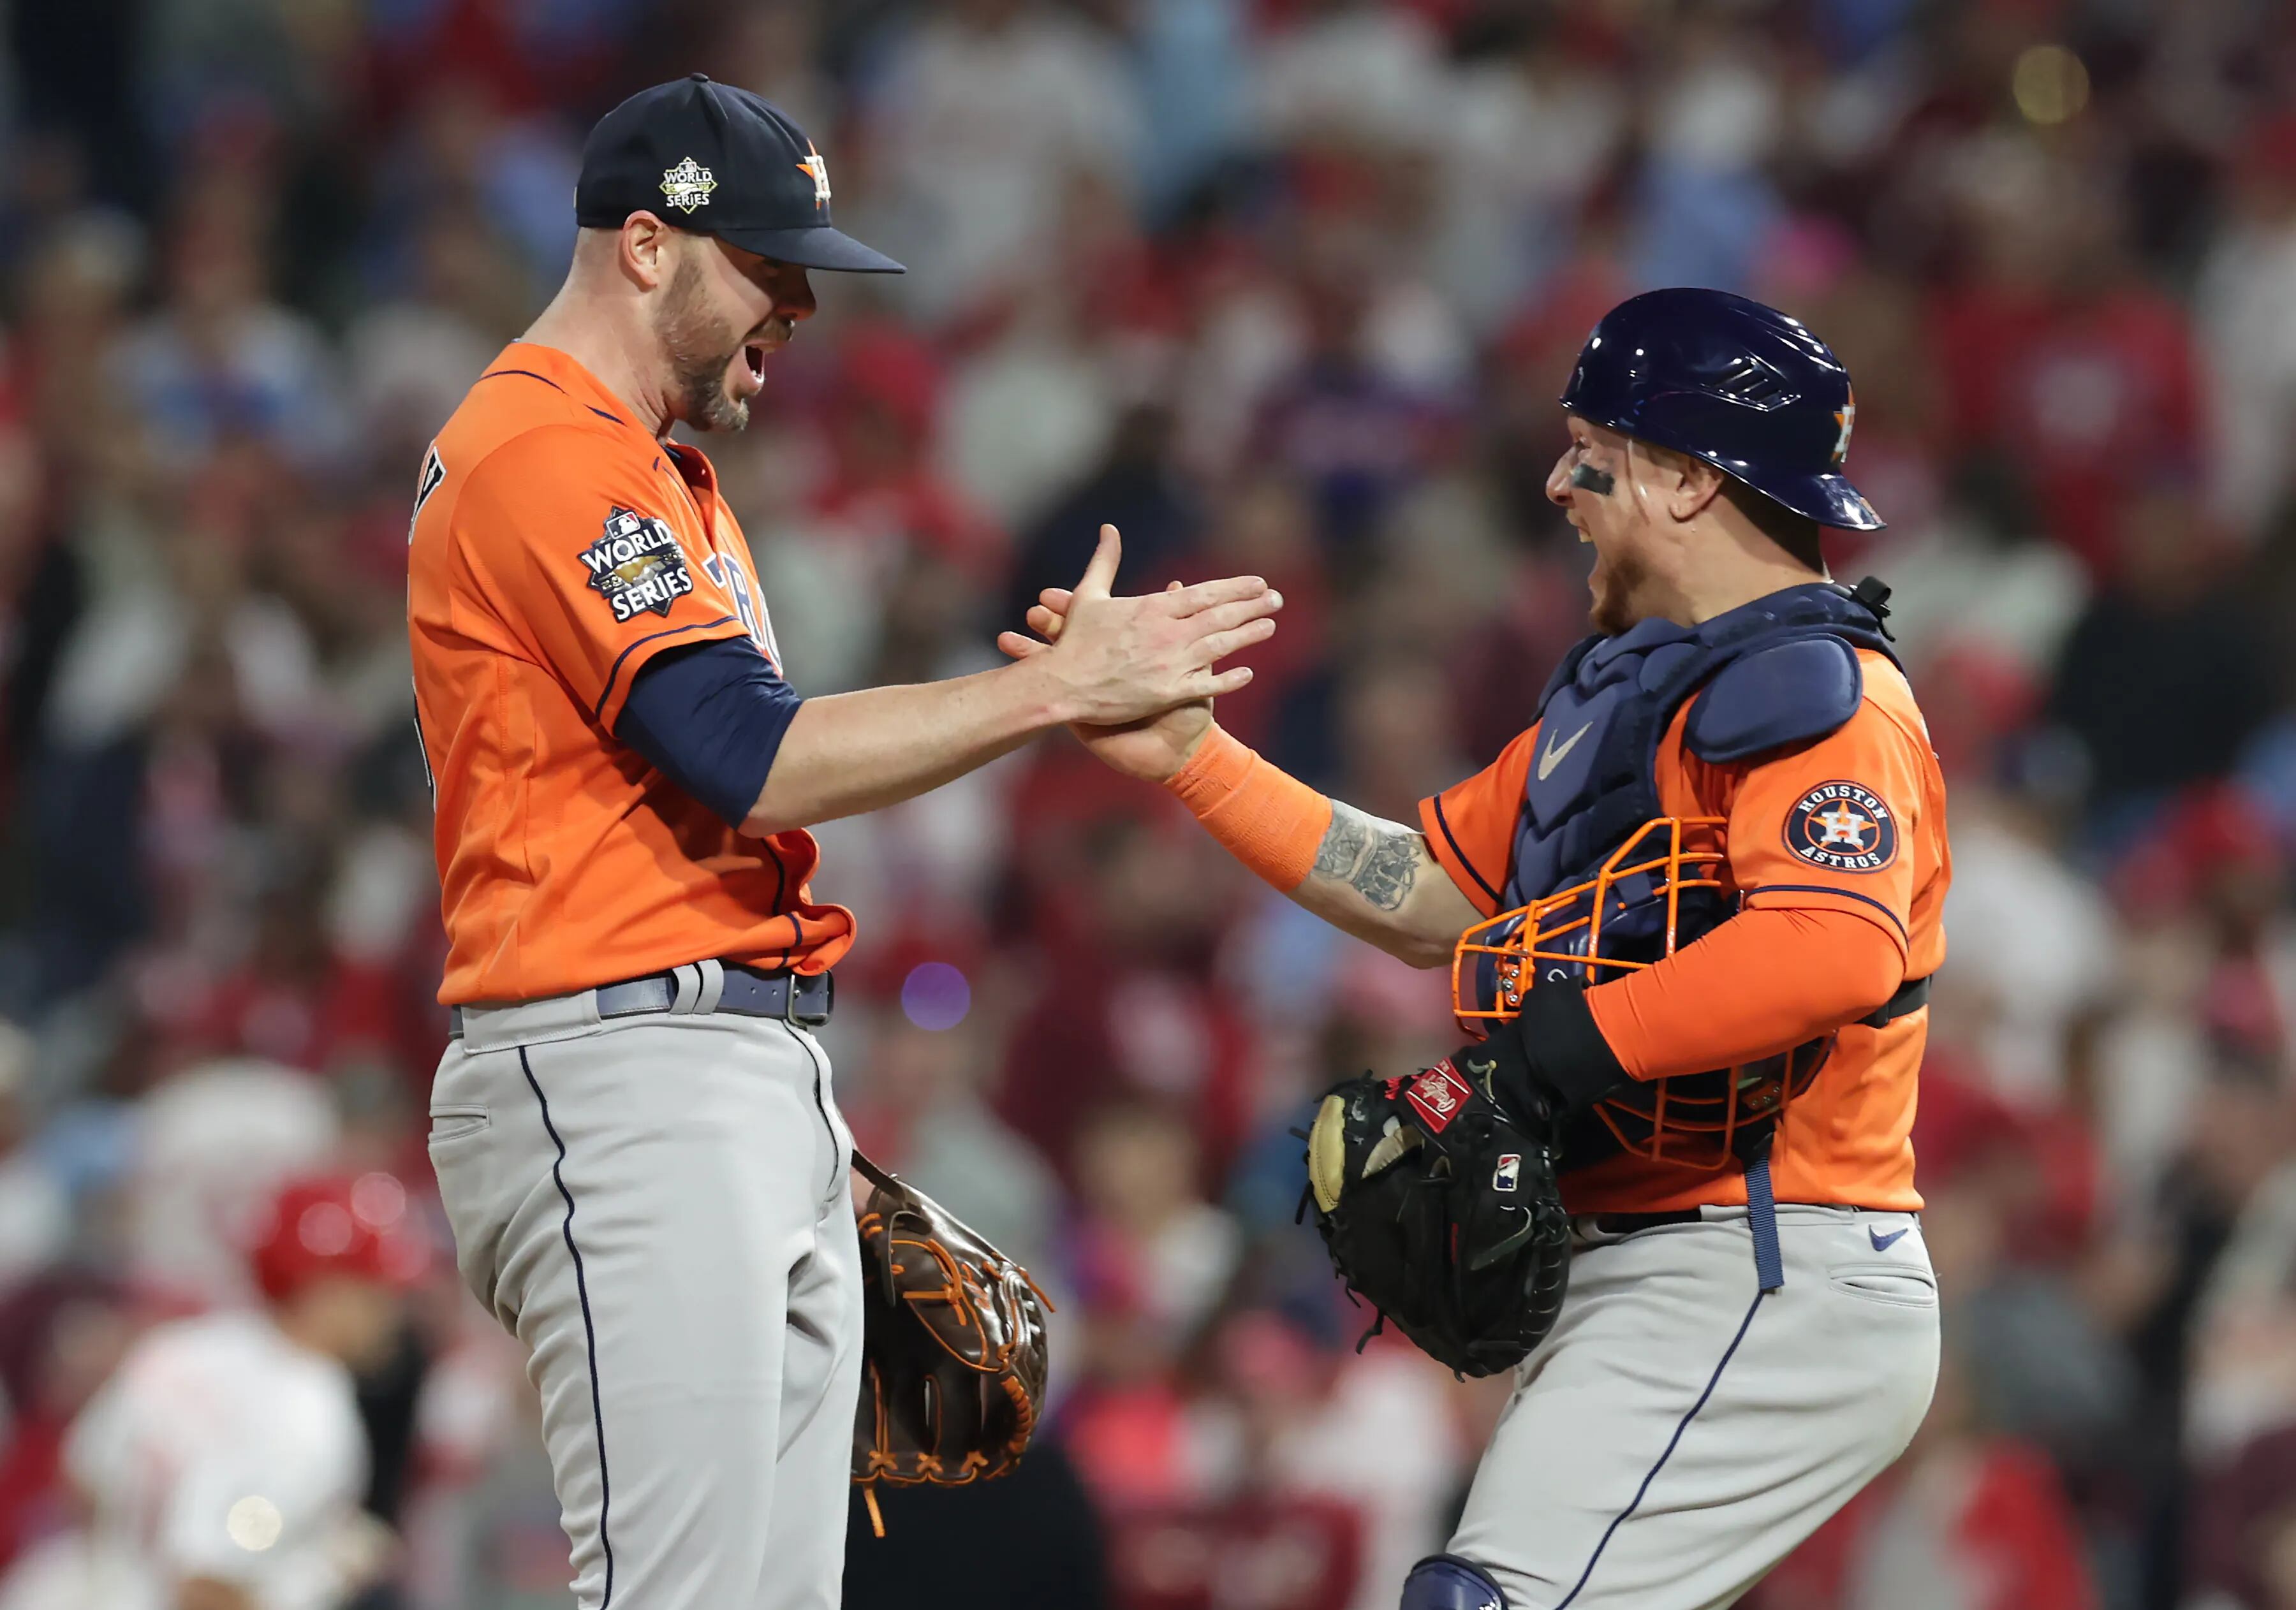 Phillies vs. Astros in 2022 World Series: Four things to watch for